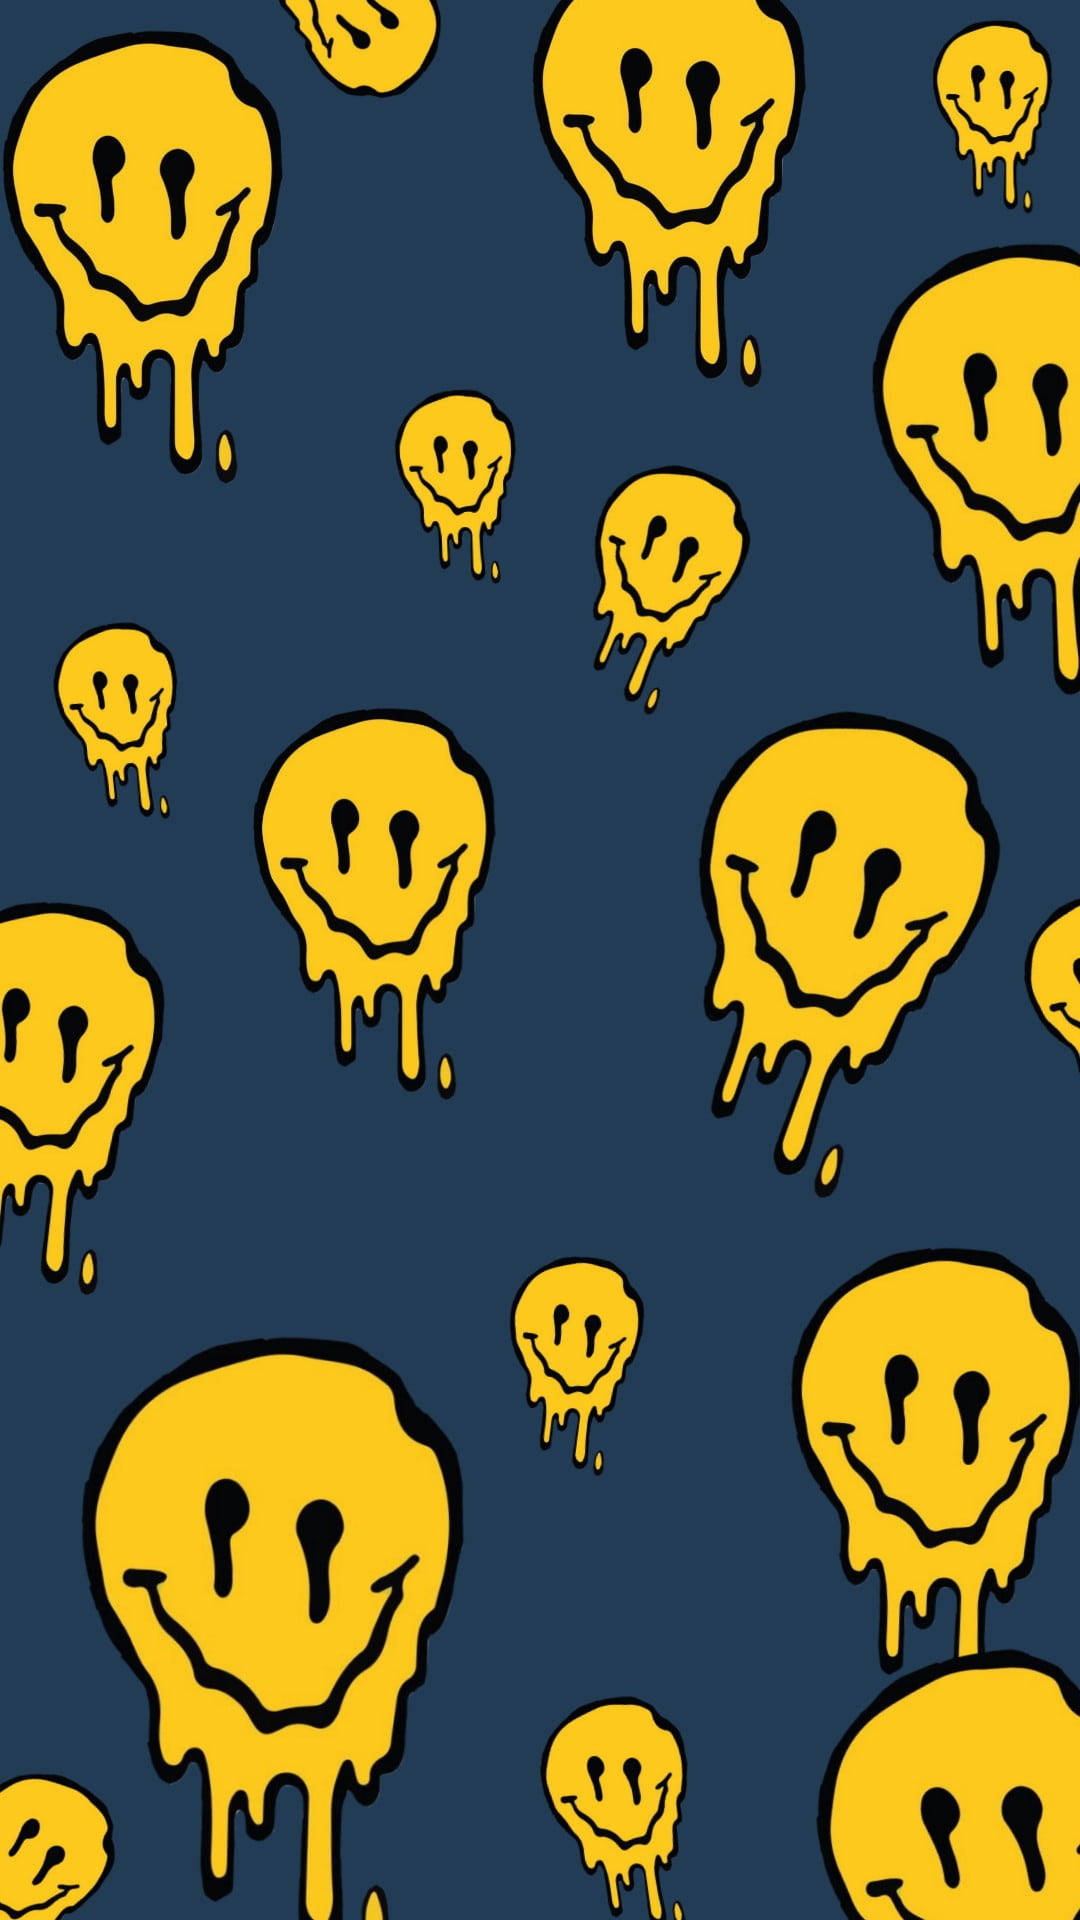 Start your day off with a bright smile And be sure to share a smile with  others as you go through your day   Happy wallpaper Smile wallpaper  Free smiley faces